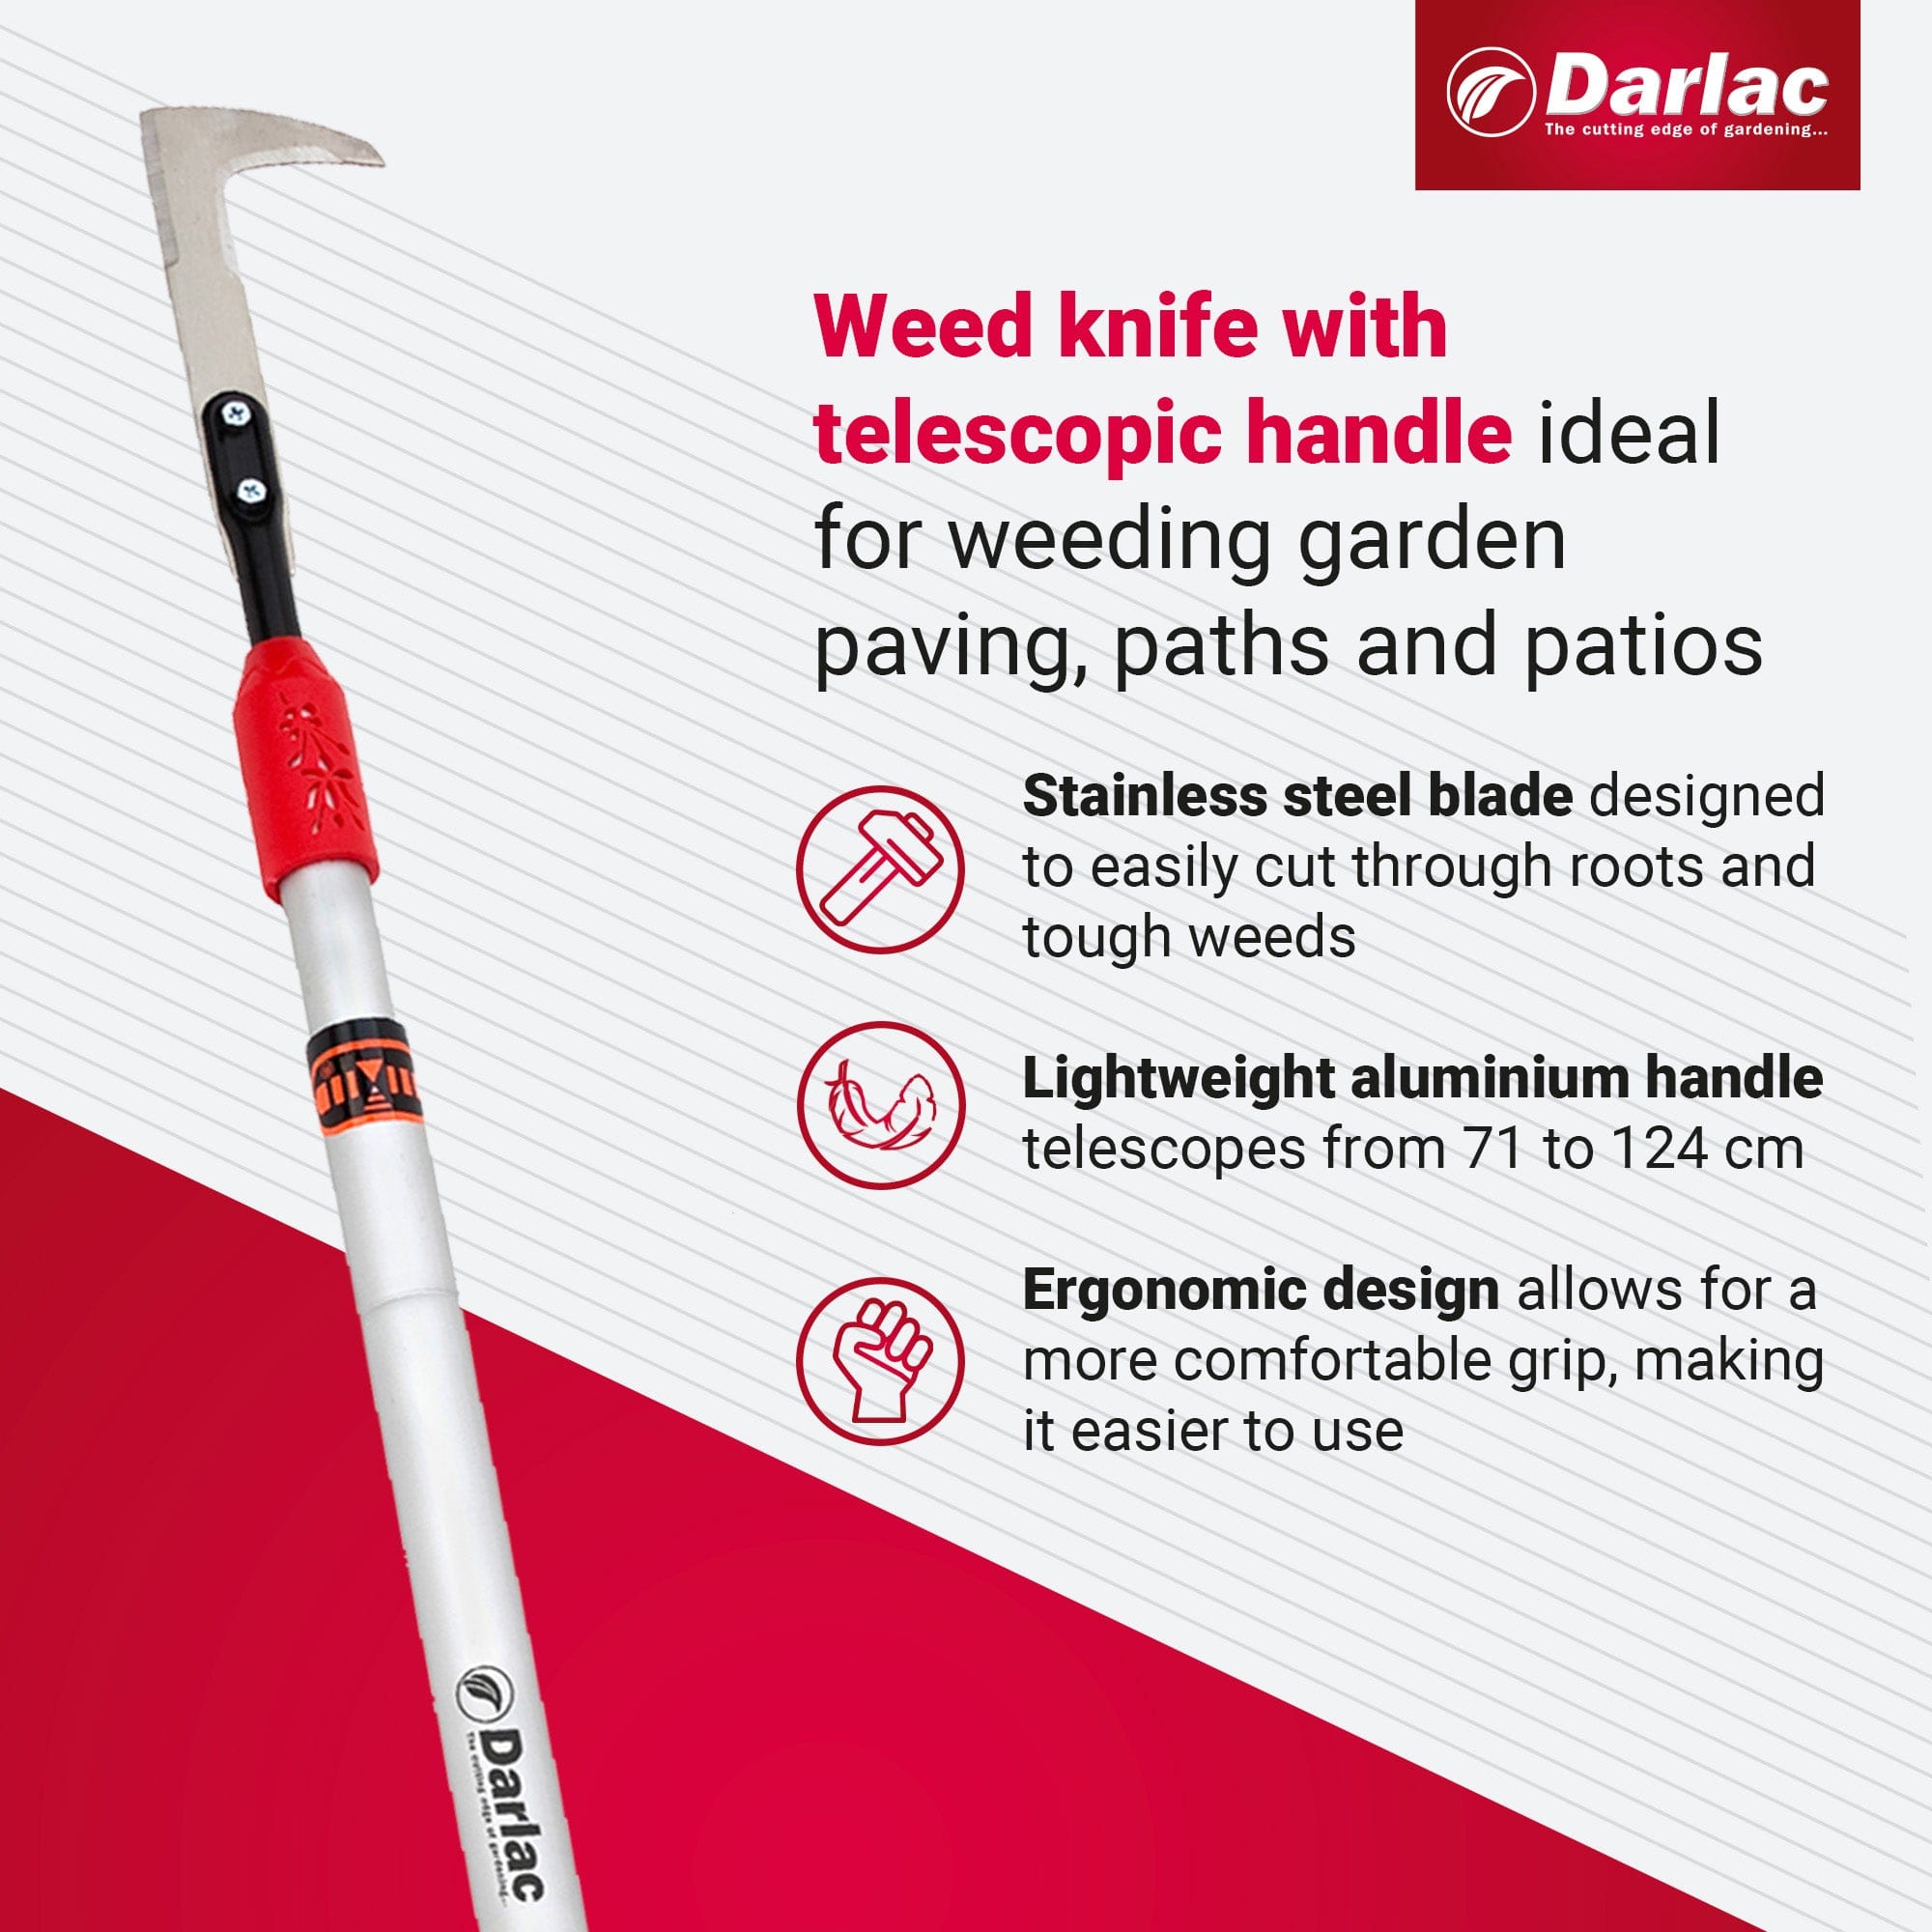 dt-brown HARDWARE Darlac Telescopic Weed Knife